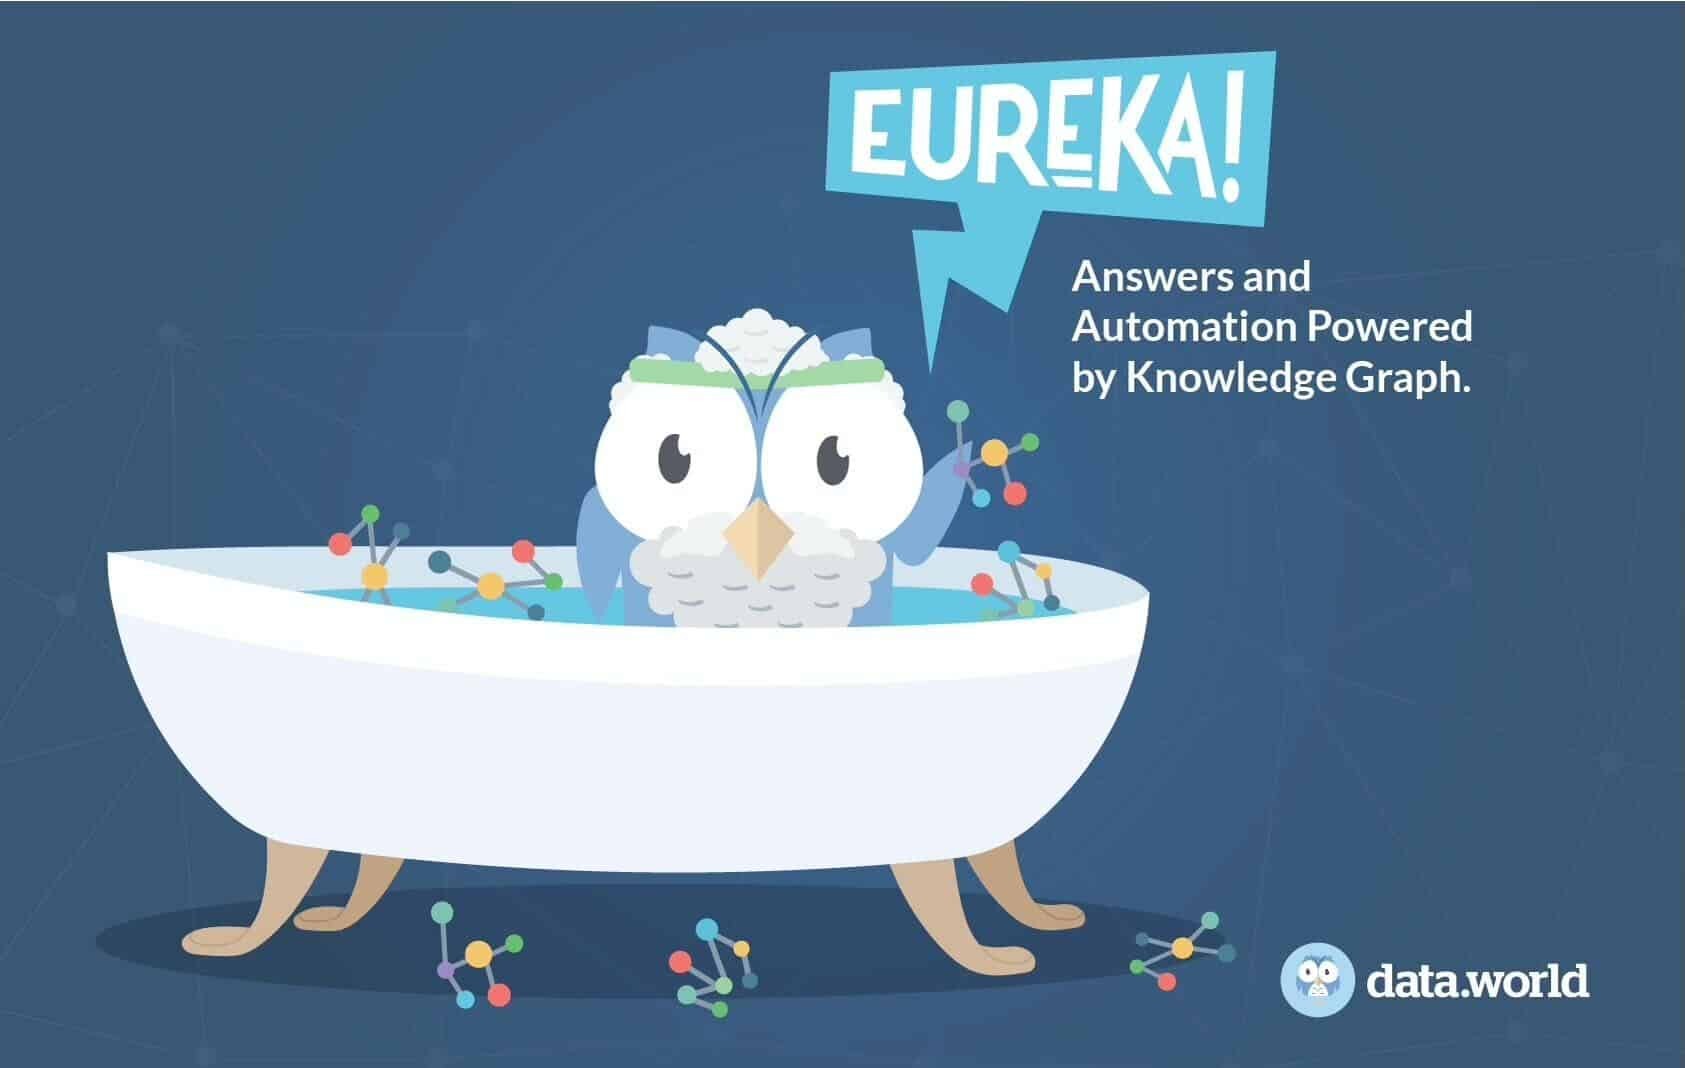 Eureka! – Let’s Shout with Archimedes about the Importance of Enabling Innovation